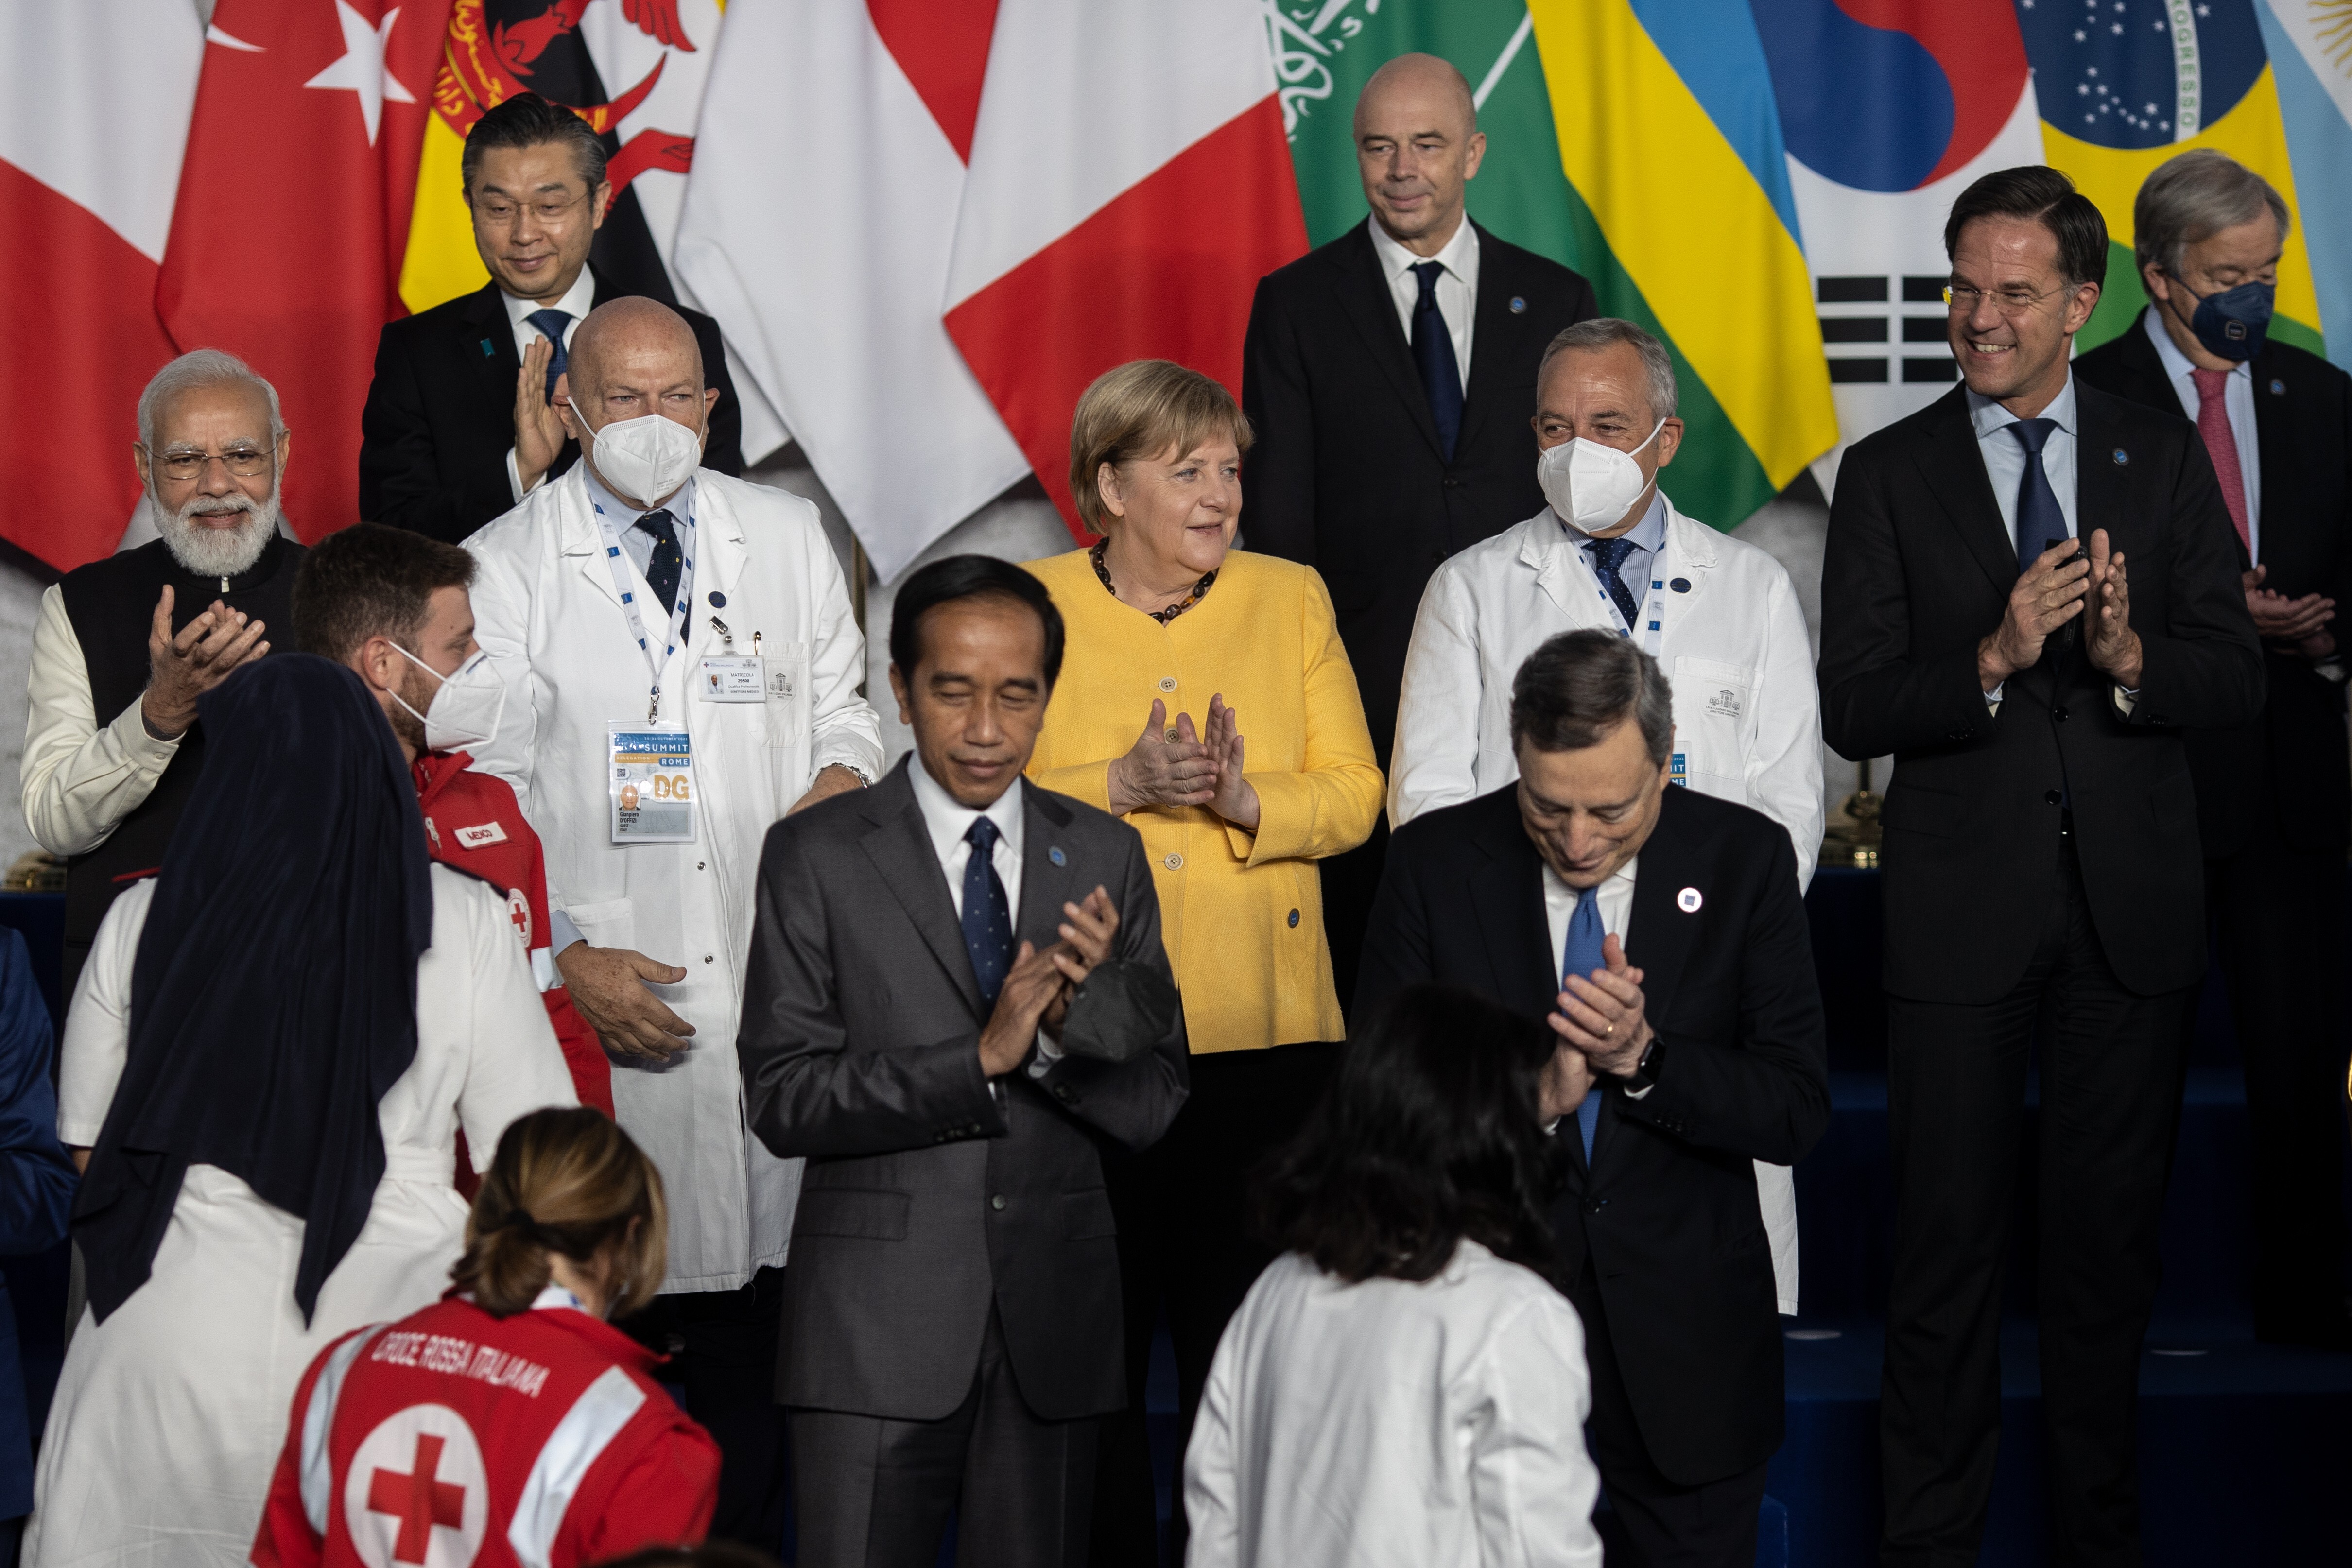 Indian Prime Minister Narendra Modi (left), German Chancellor Angela Merkel (centre), Dutch Prime Minister Mark Rutte (right), Italian Prime Minister Mario Draghi and Indonesian President Joko Widodo applaud Italian health care workers as they gather for the official family photo on day one of the G20 World Leaders Summit at Rome Convention Centre. Photo: DPA